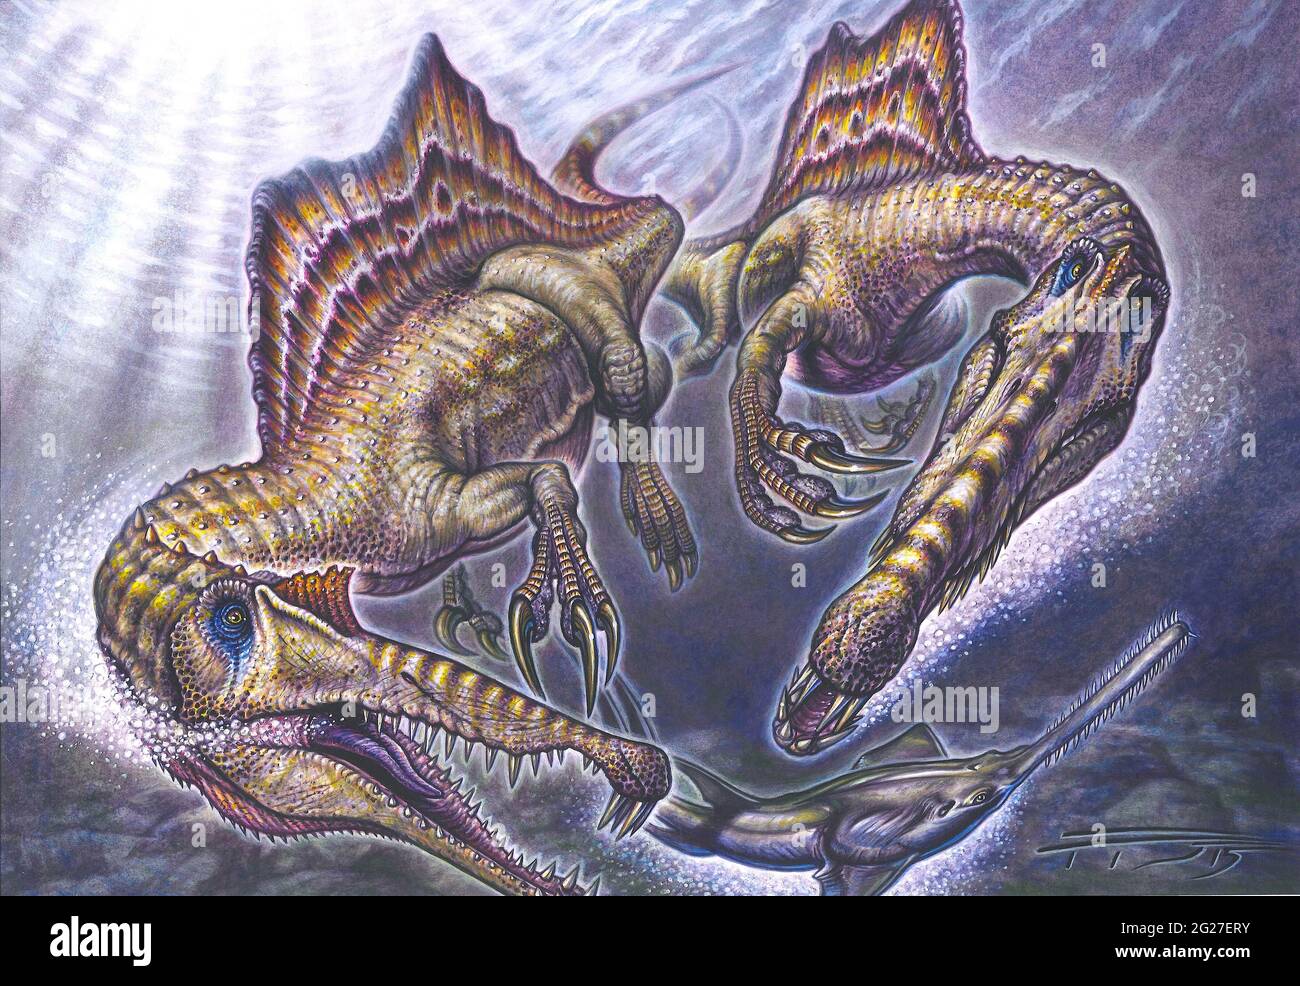 A pair of Spinosaurus aegyptiacus prey on an Onchopristis passing by. Stock Photo